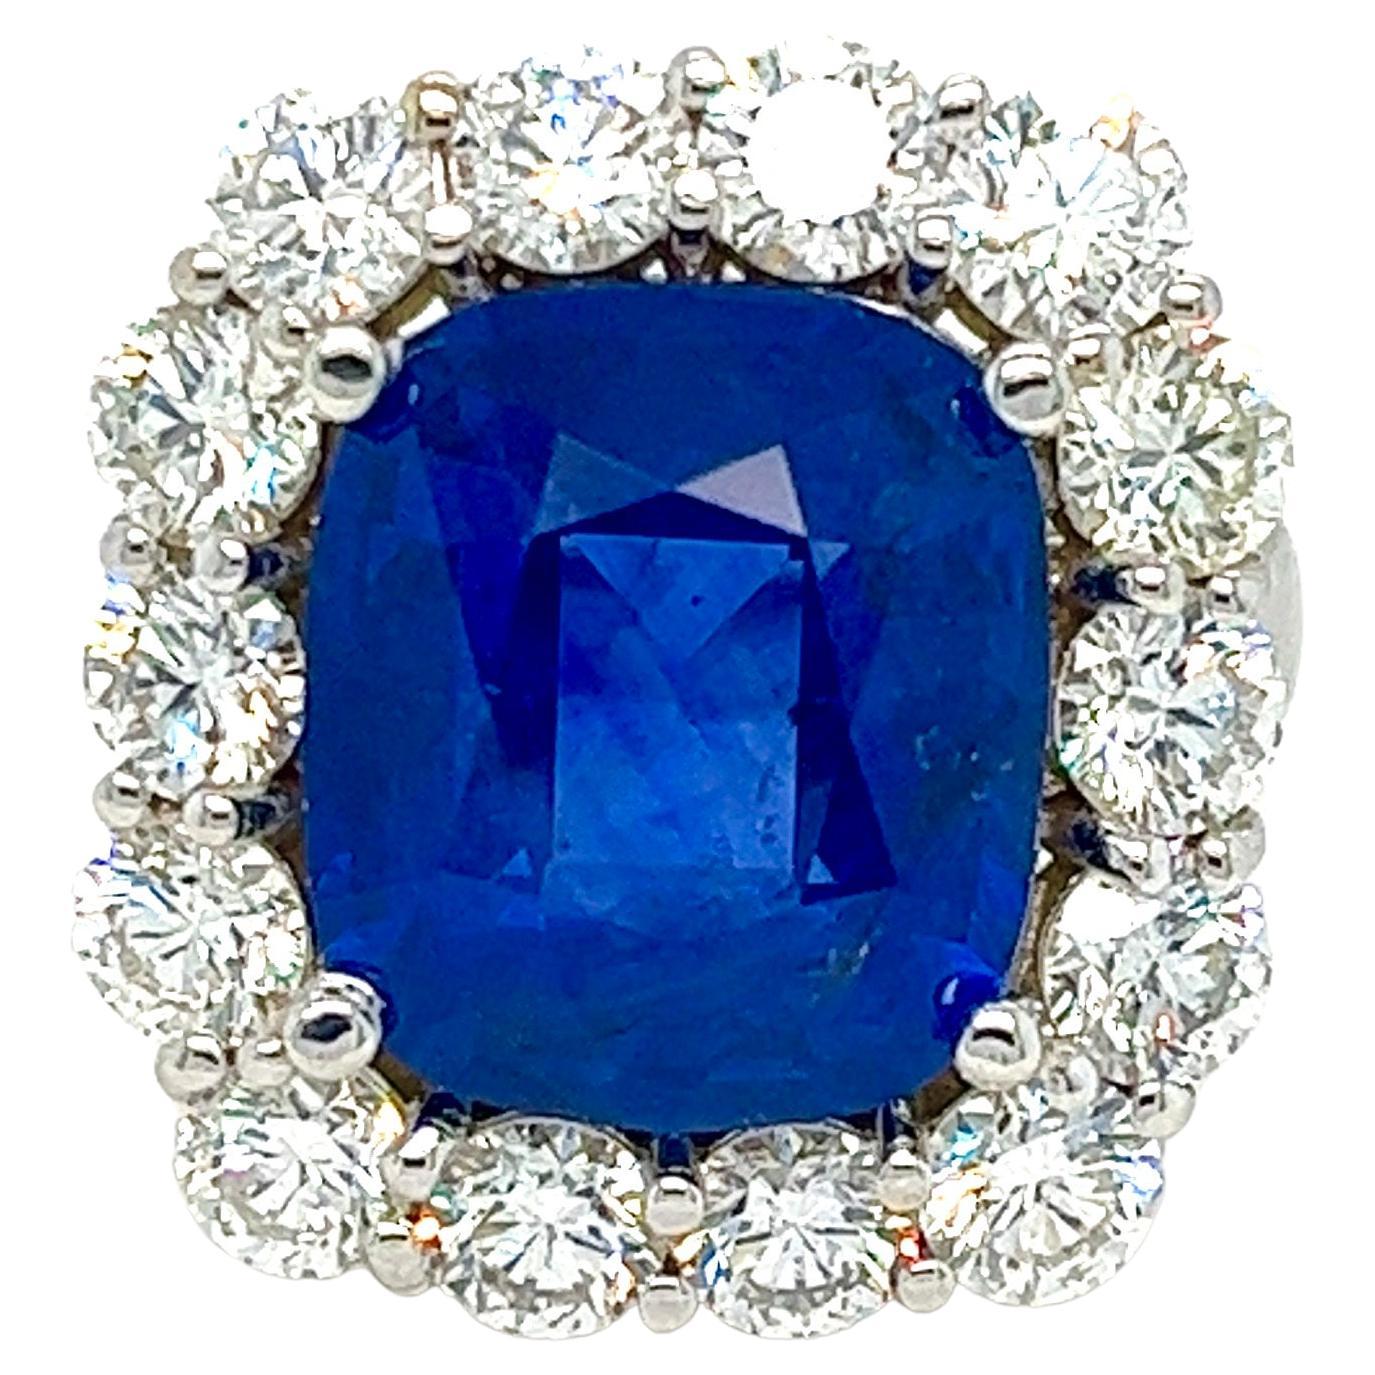 Experience the epitome of elegance with our stunning 18kt white gold ring. A breathtaking 8.87 ct natural earth-mined blue sapphire takes center stage, radiating timeless beauty. Surrounding it, a mesmerizing frame of natural sparkly bright white